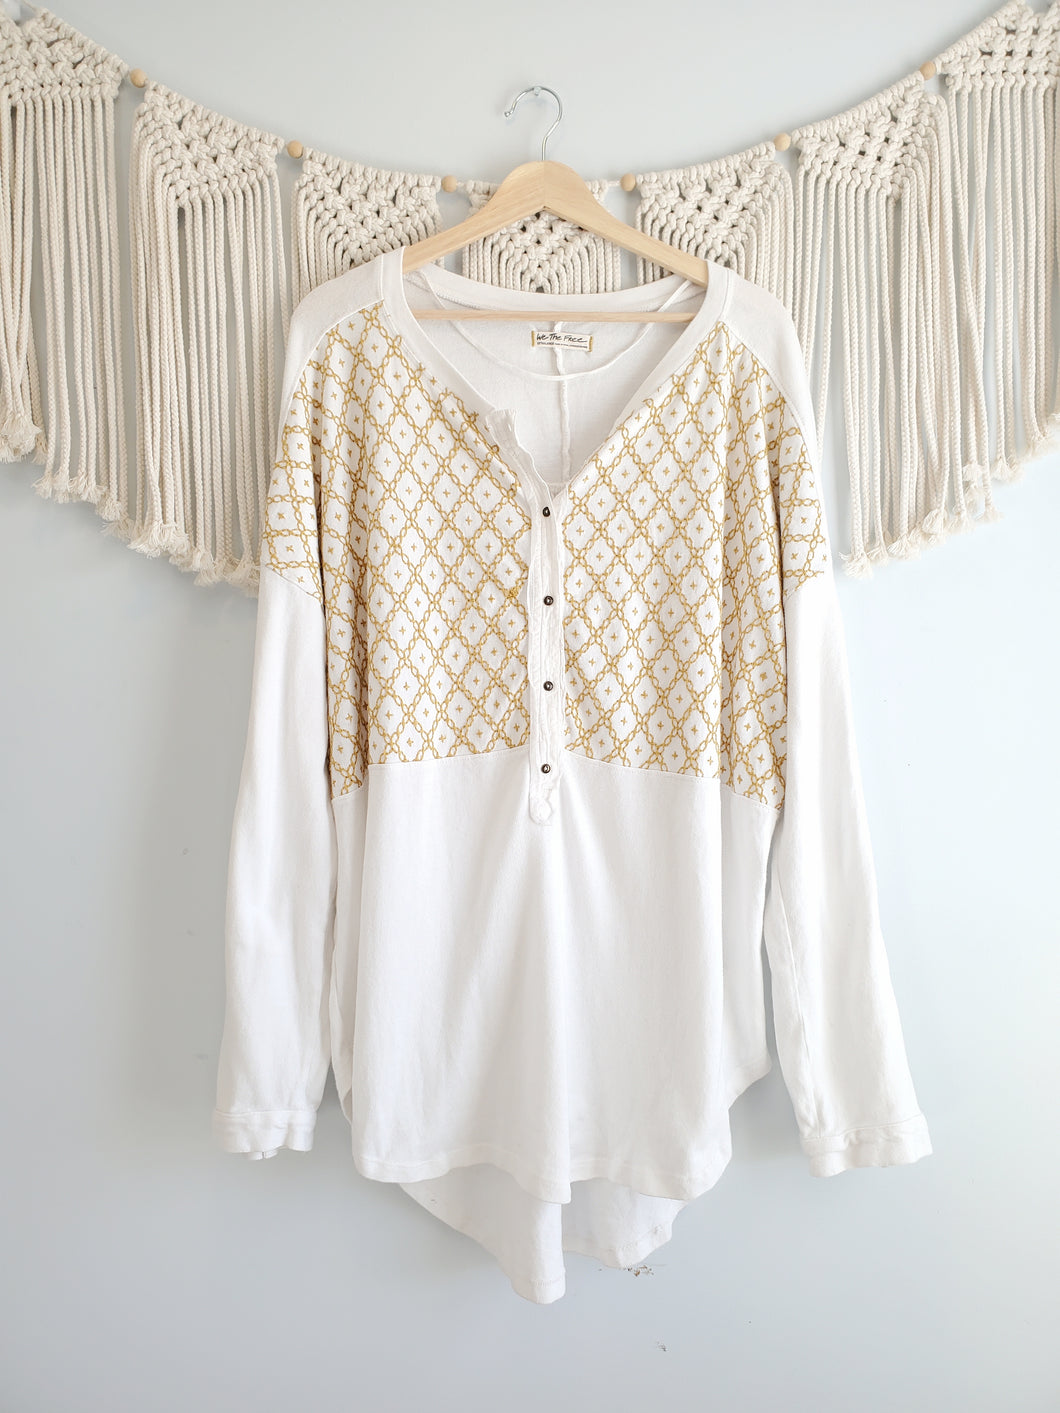 Free People Embroidered Tunic (XL)